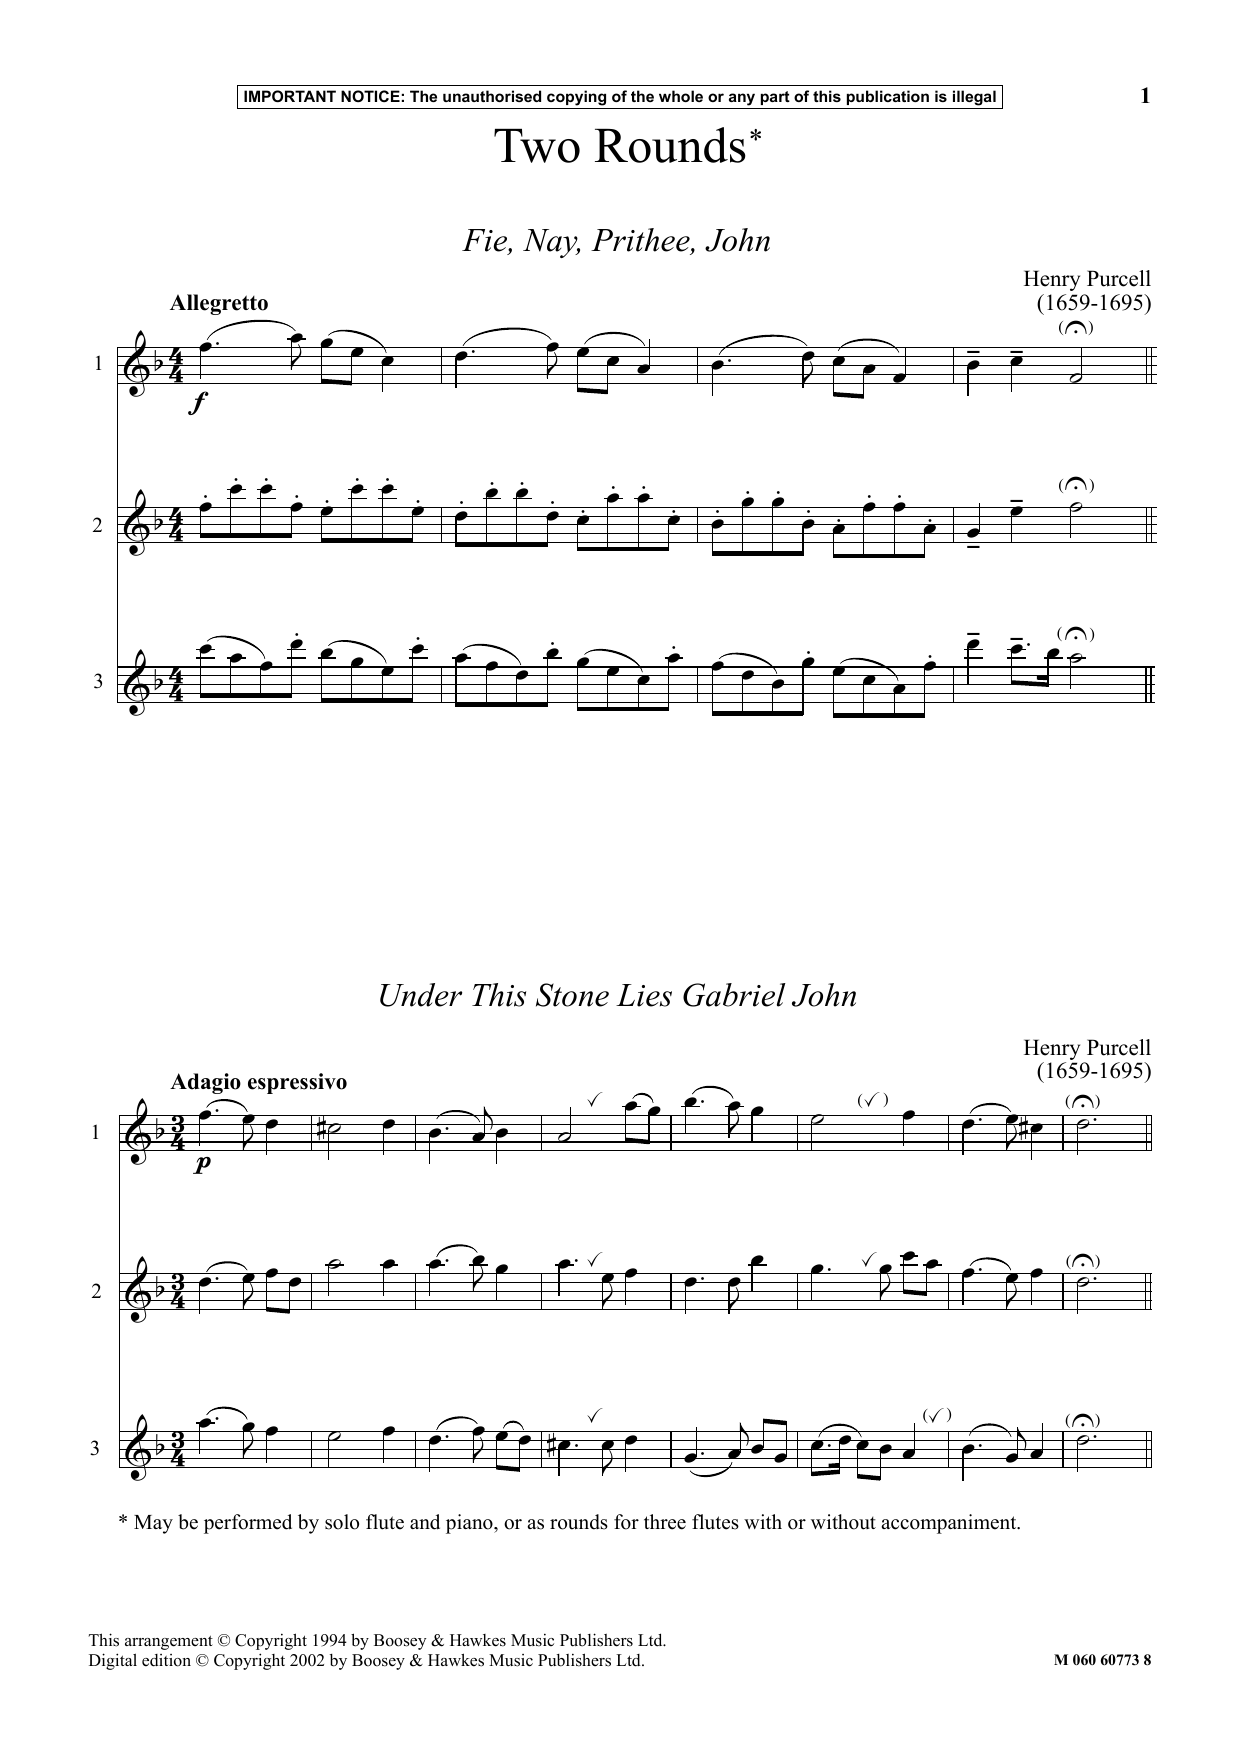 Download Henry Purcell Two Rounds Sheet Music